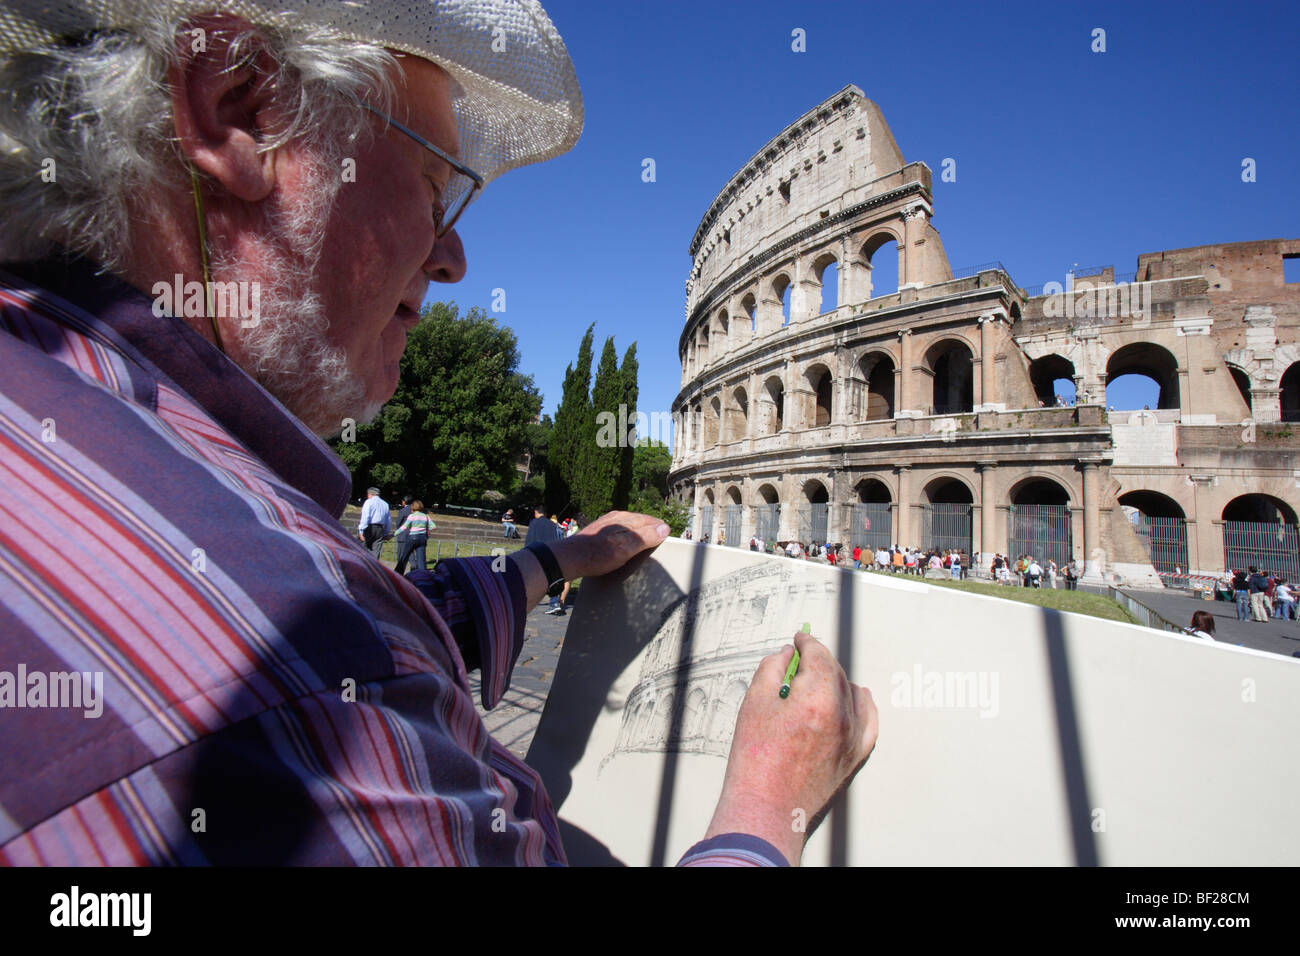 Mature man drawing in front of the Colosseum, Rome, Italy, Europe Stock Photo